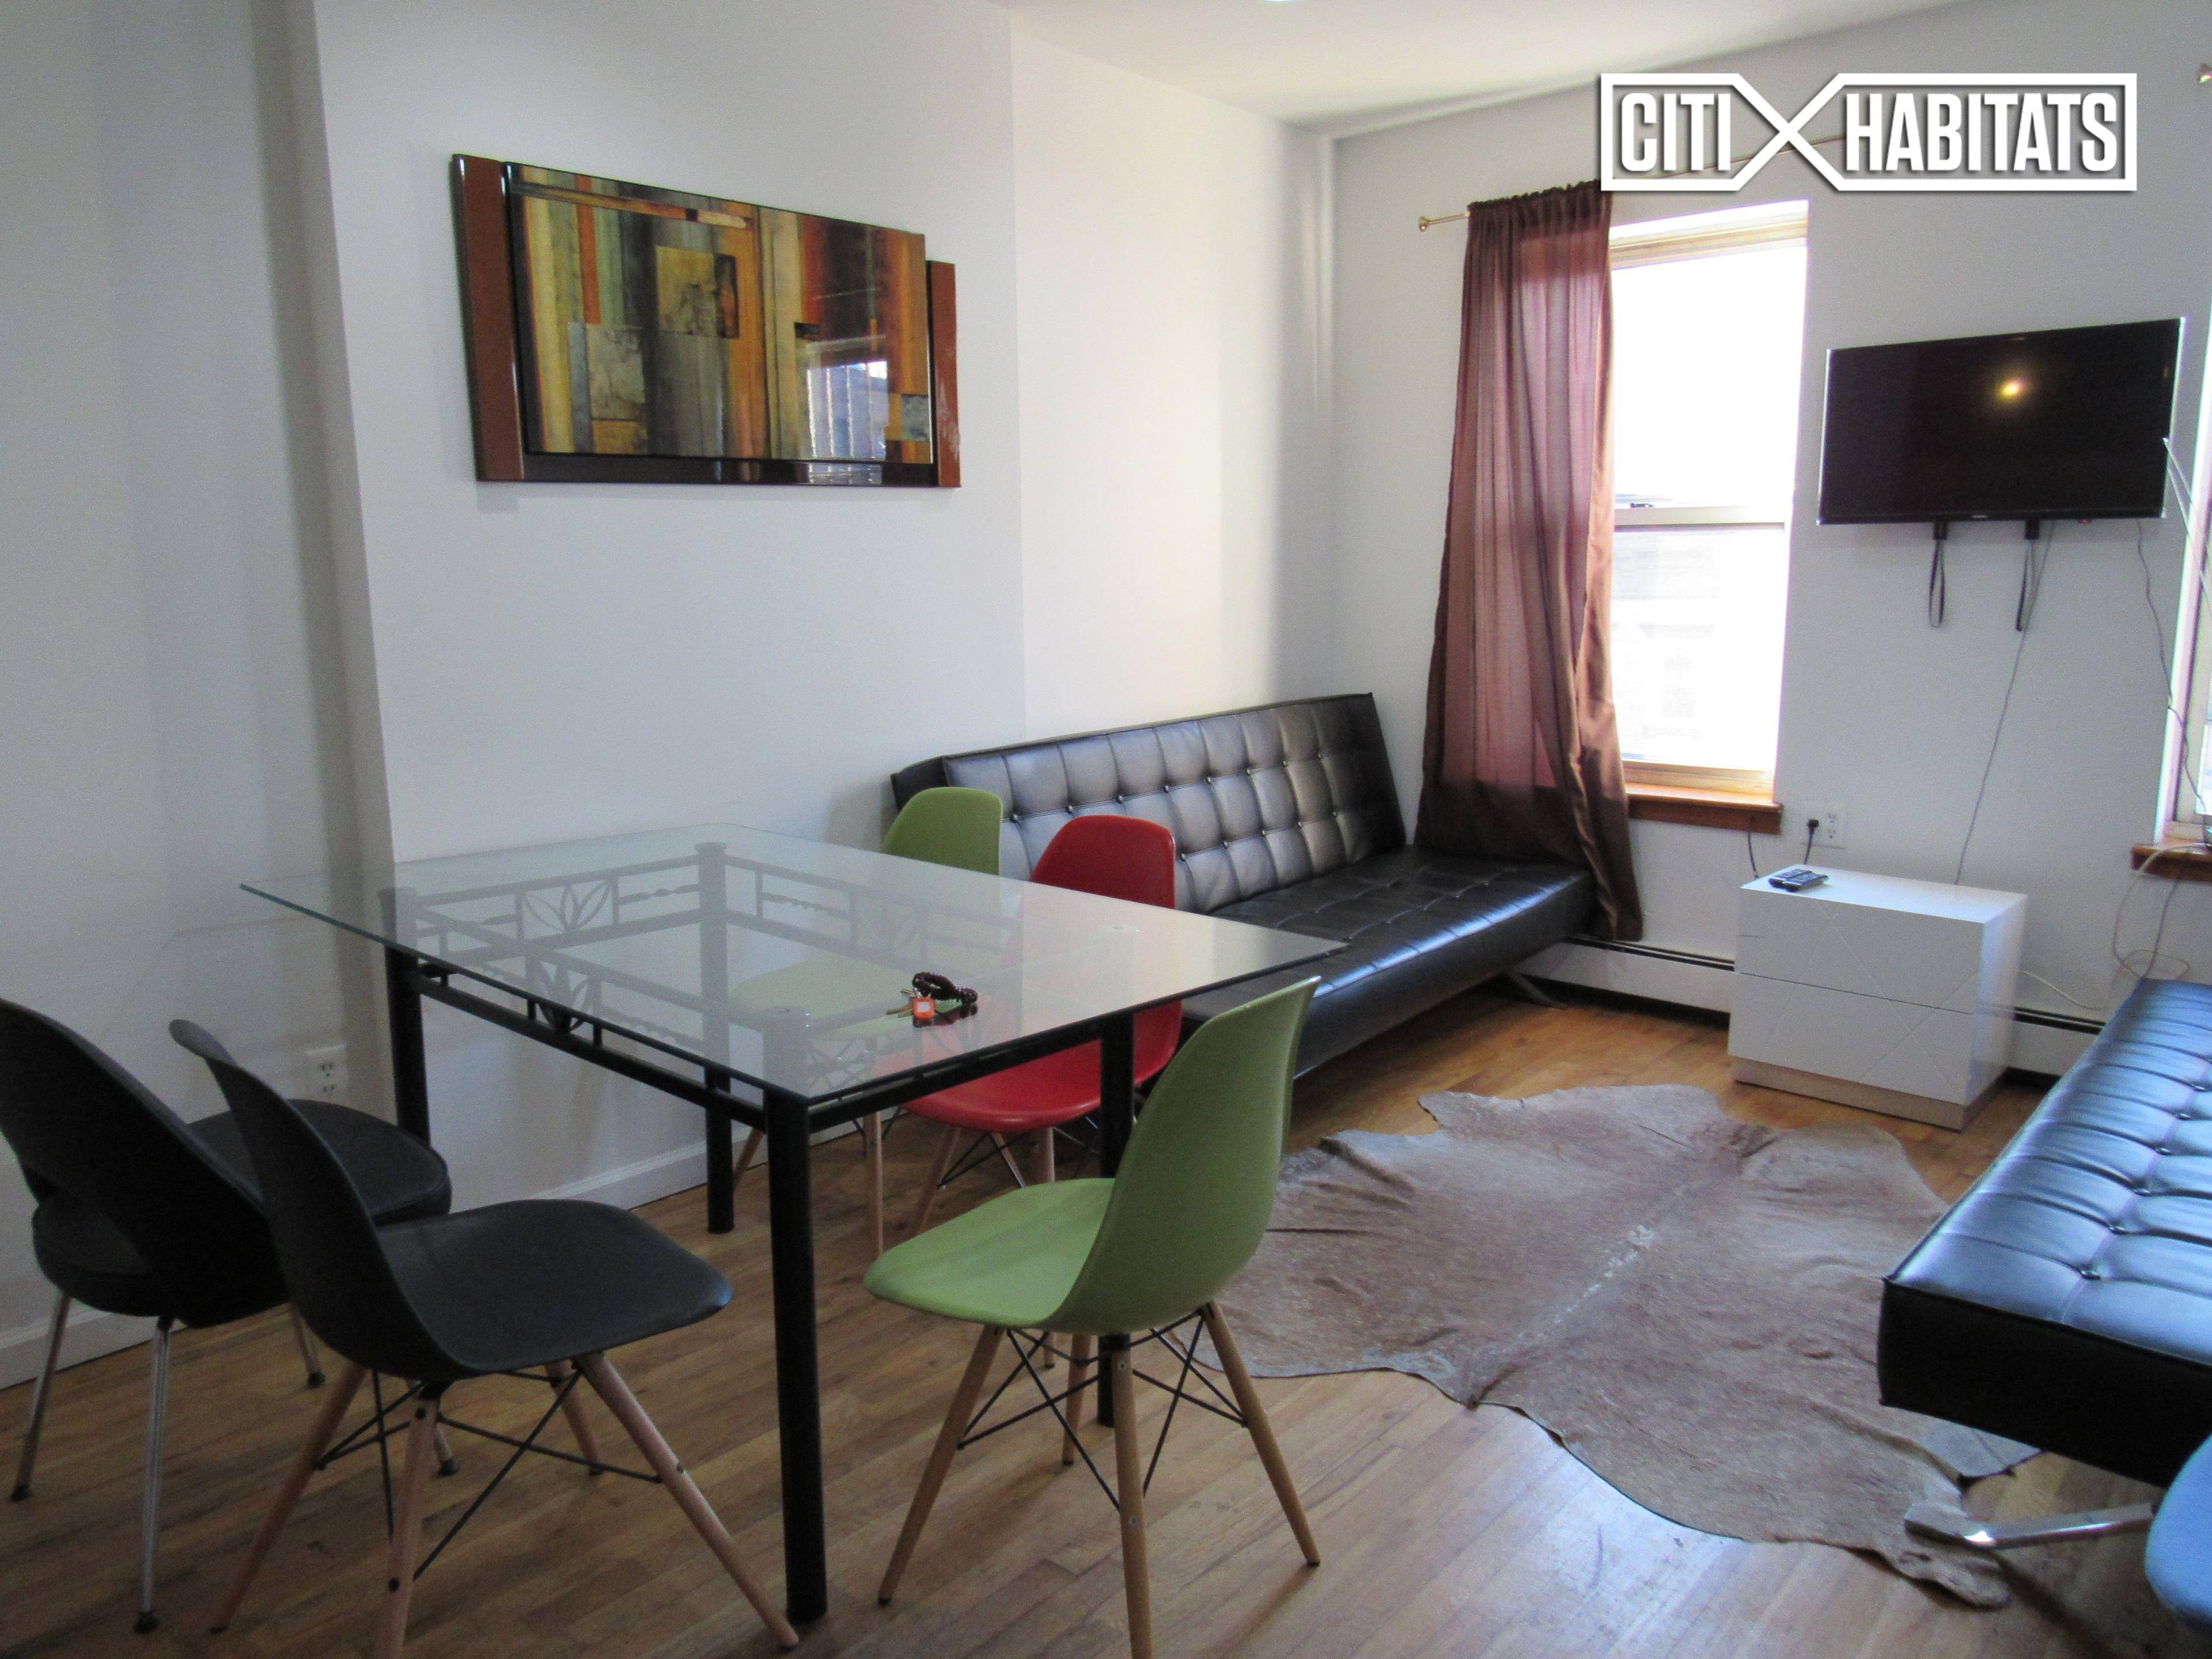 Here is a Great Furnished 3BD 1BA in the cool East side of Manhattan in a Traditional NYC building.